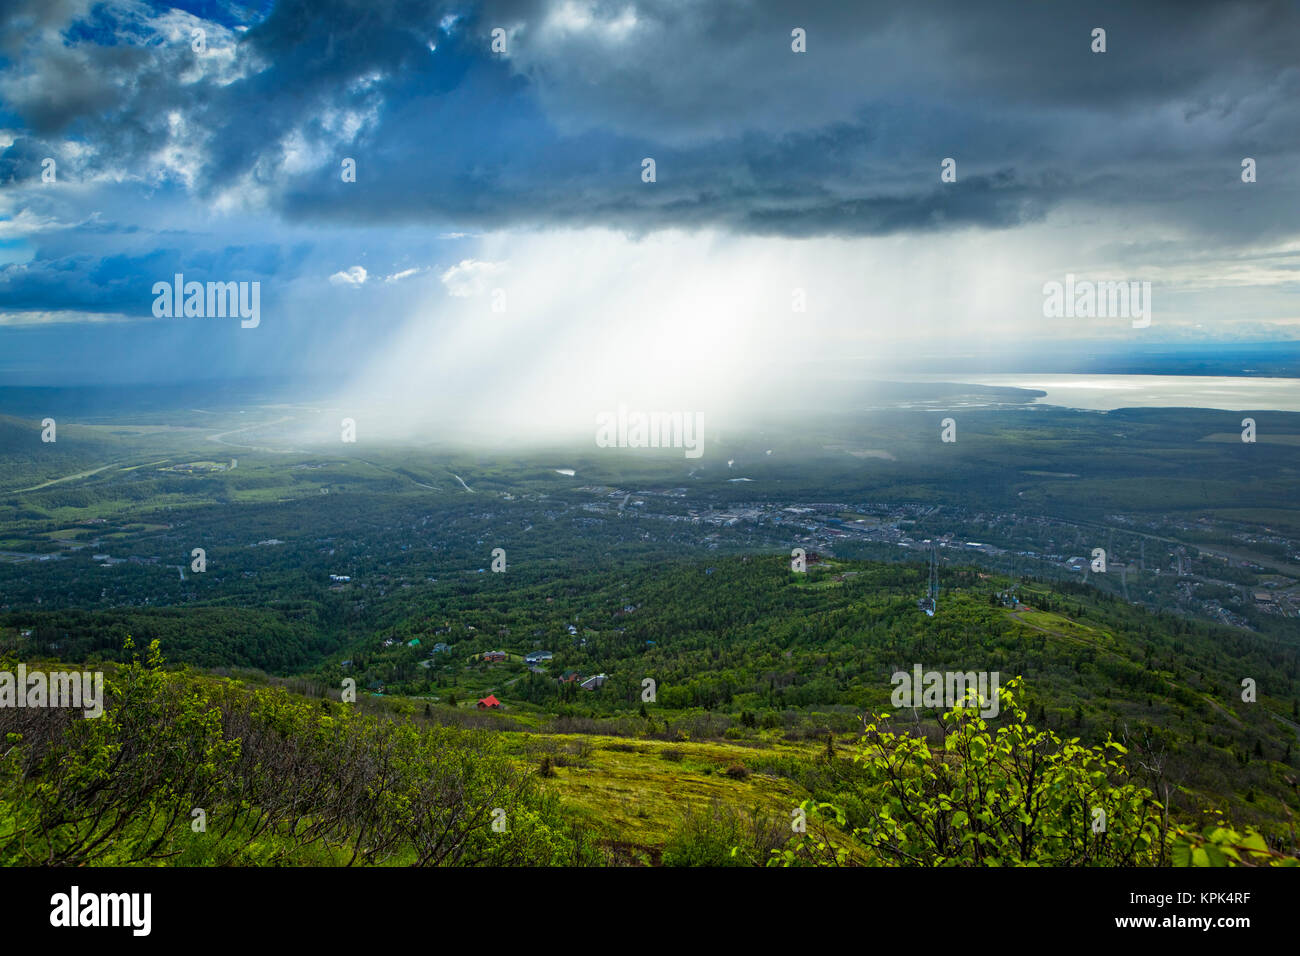 Rays of sunlight break through the dark clouds to the city below; Eagle River, Alaska, United States of America Stock Photo